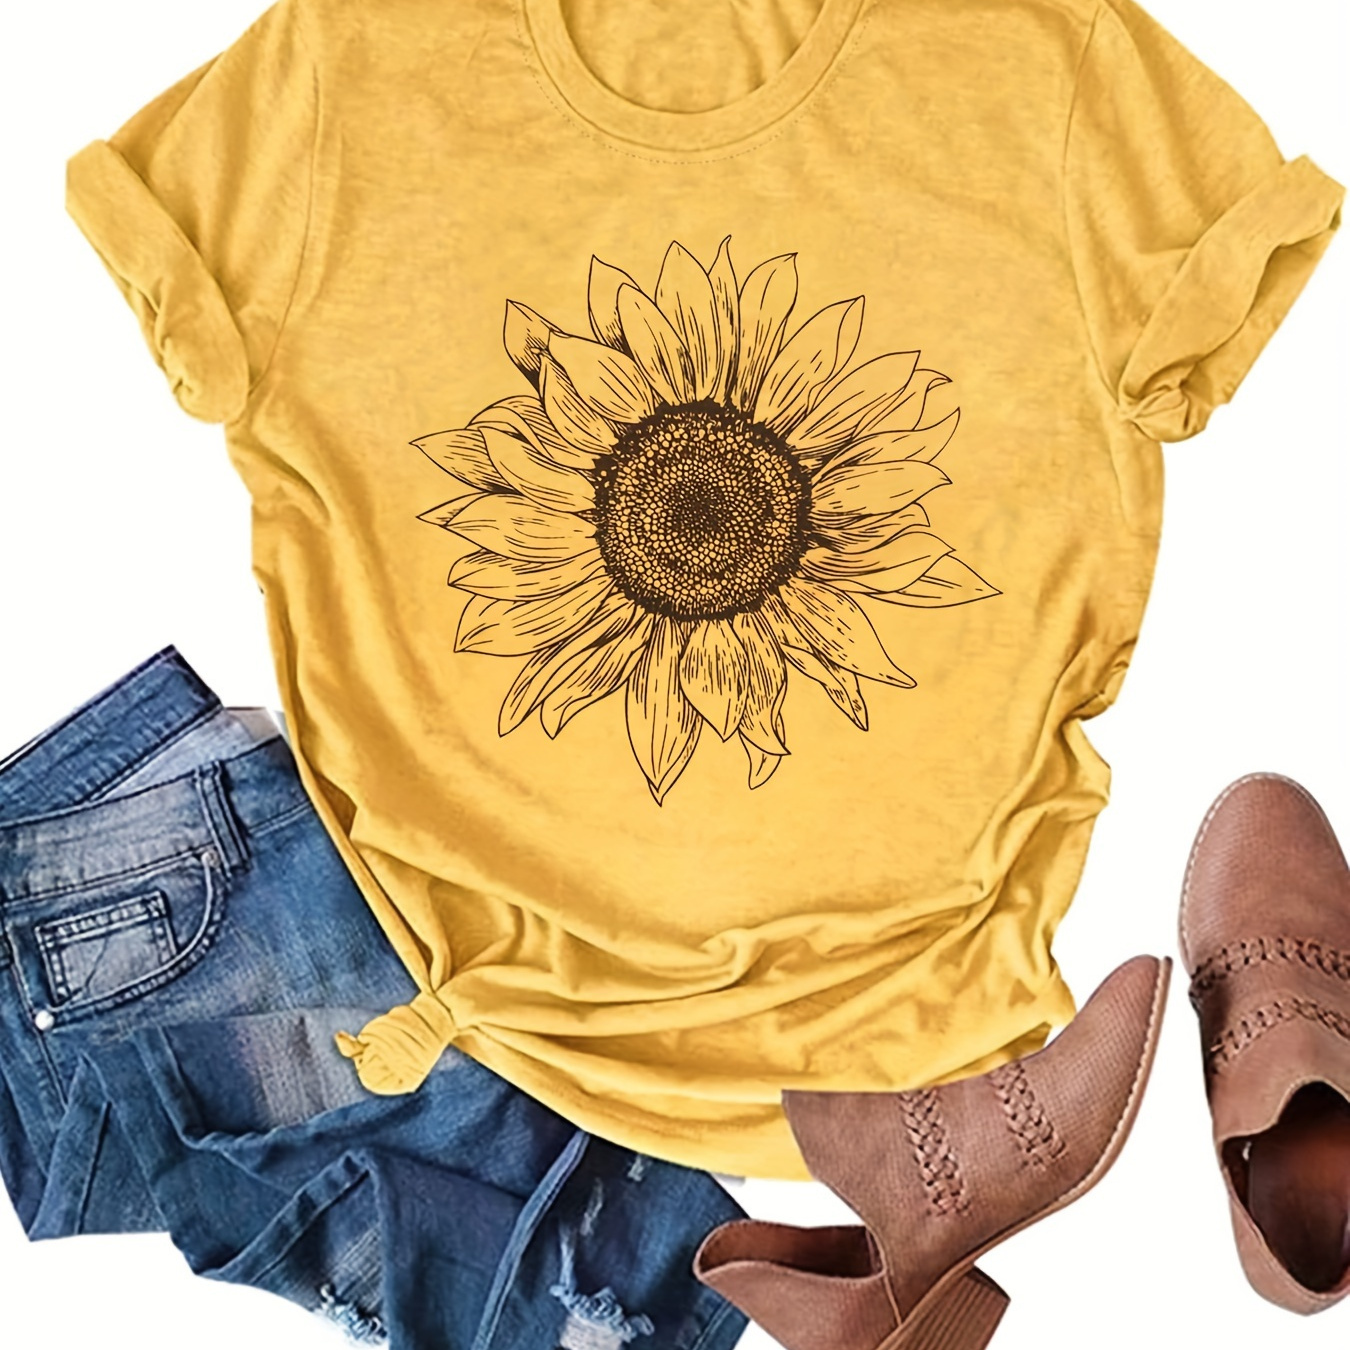 

Sunflower Print Crew Neck T-shirt, Casual Short Sleeve Top For Spring & Summer, Women's Clothing